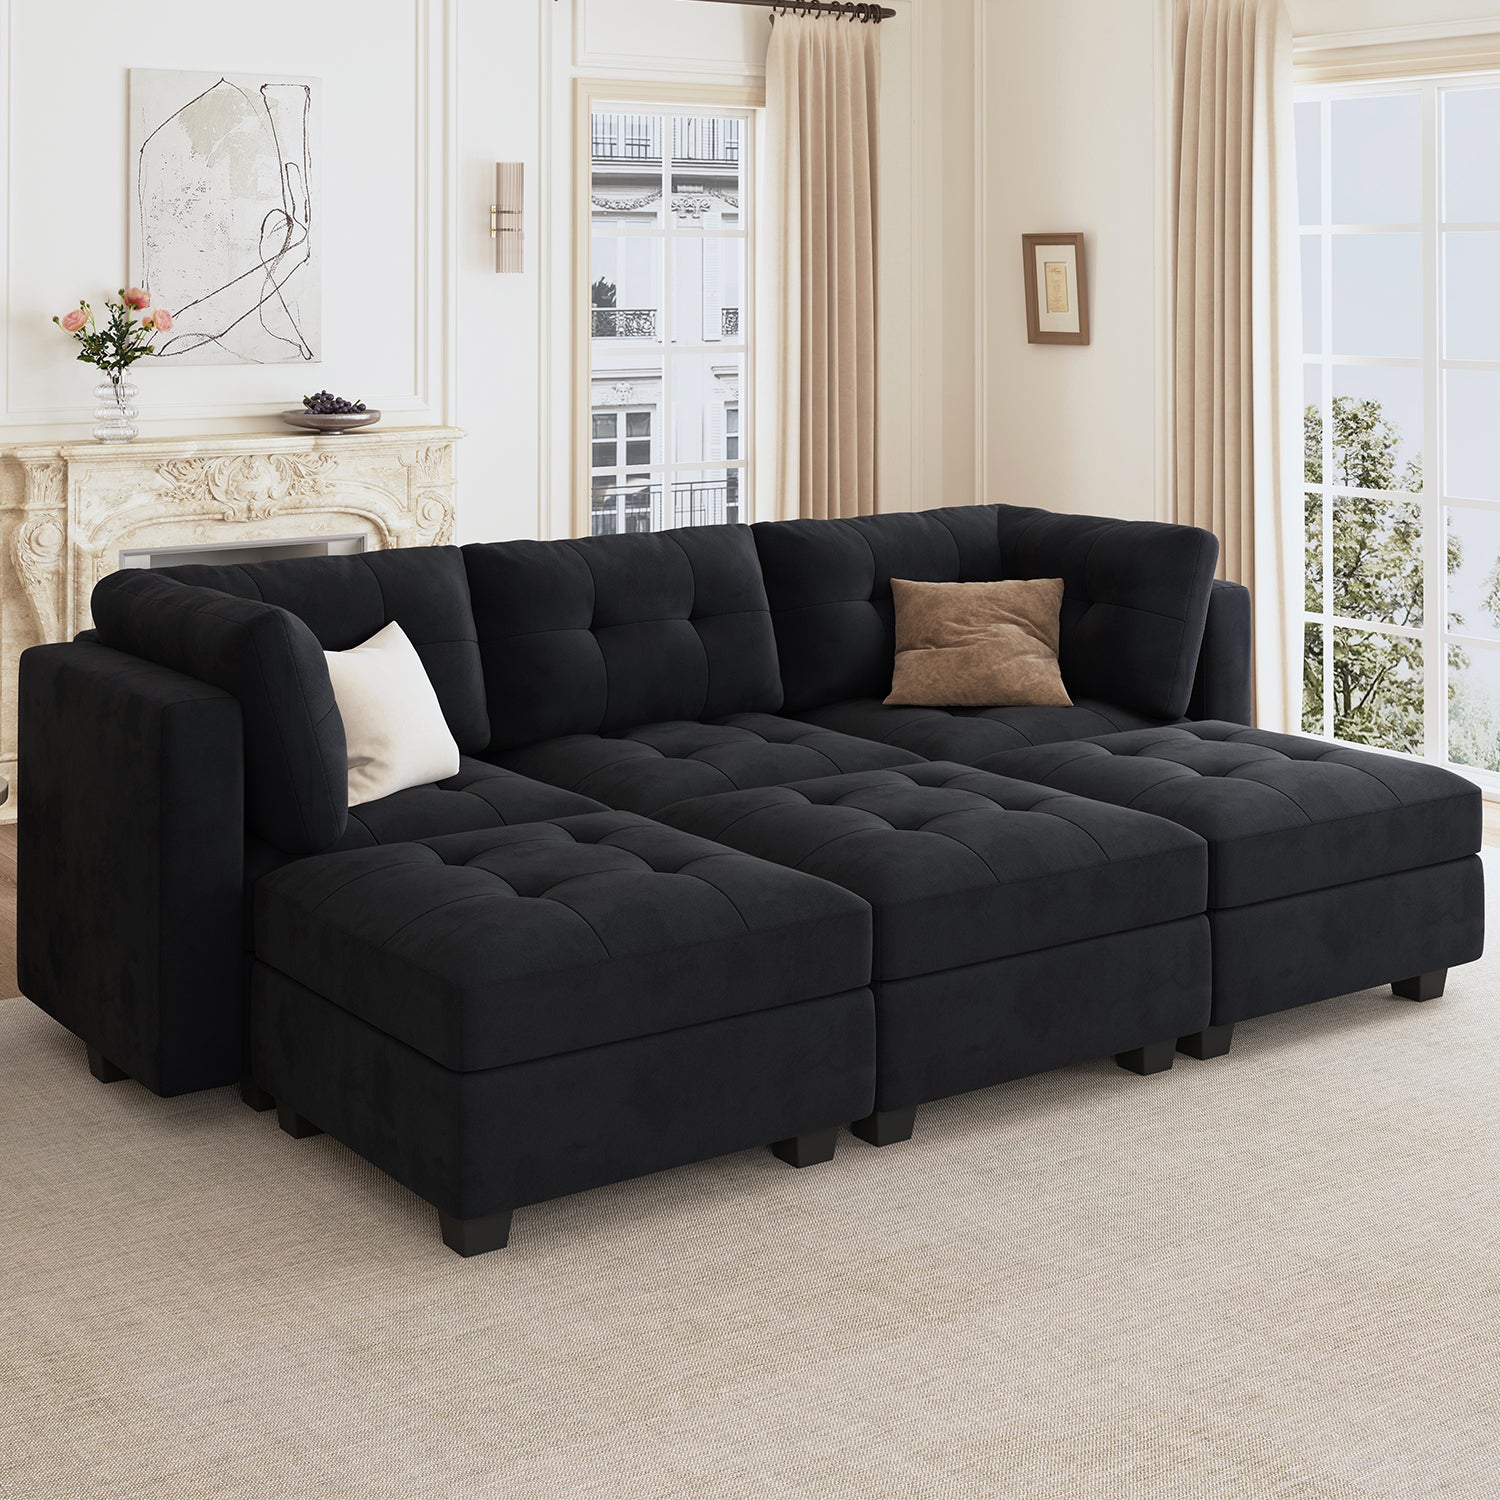 Modular Sleeper Sectional With Storage Seat